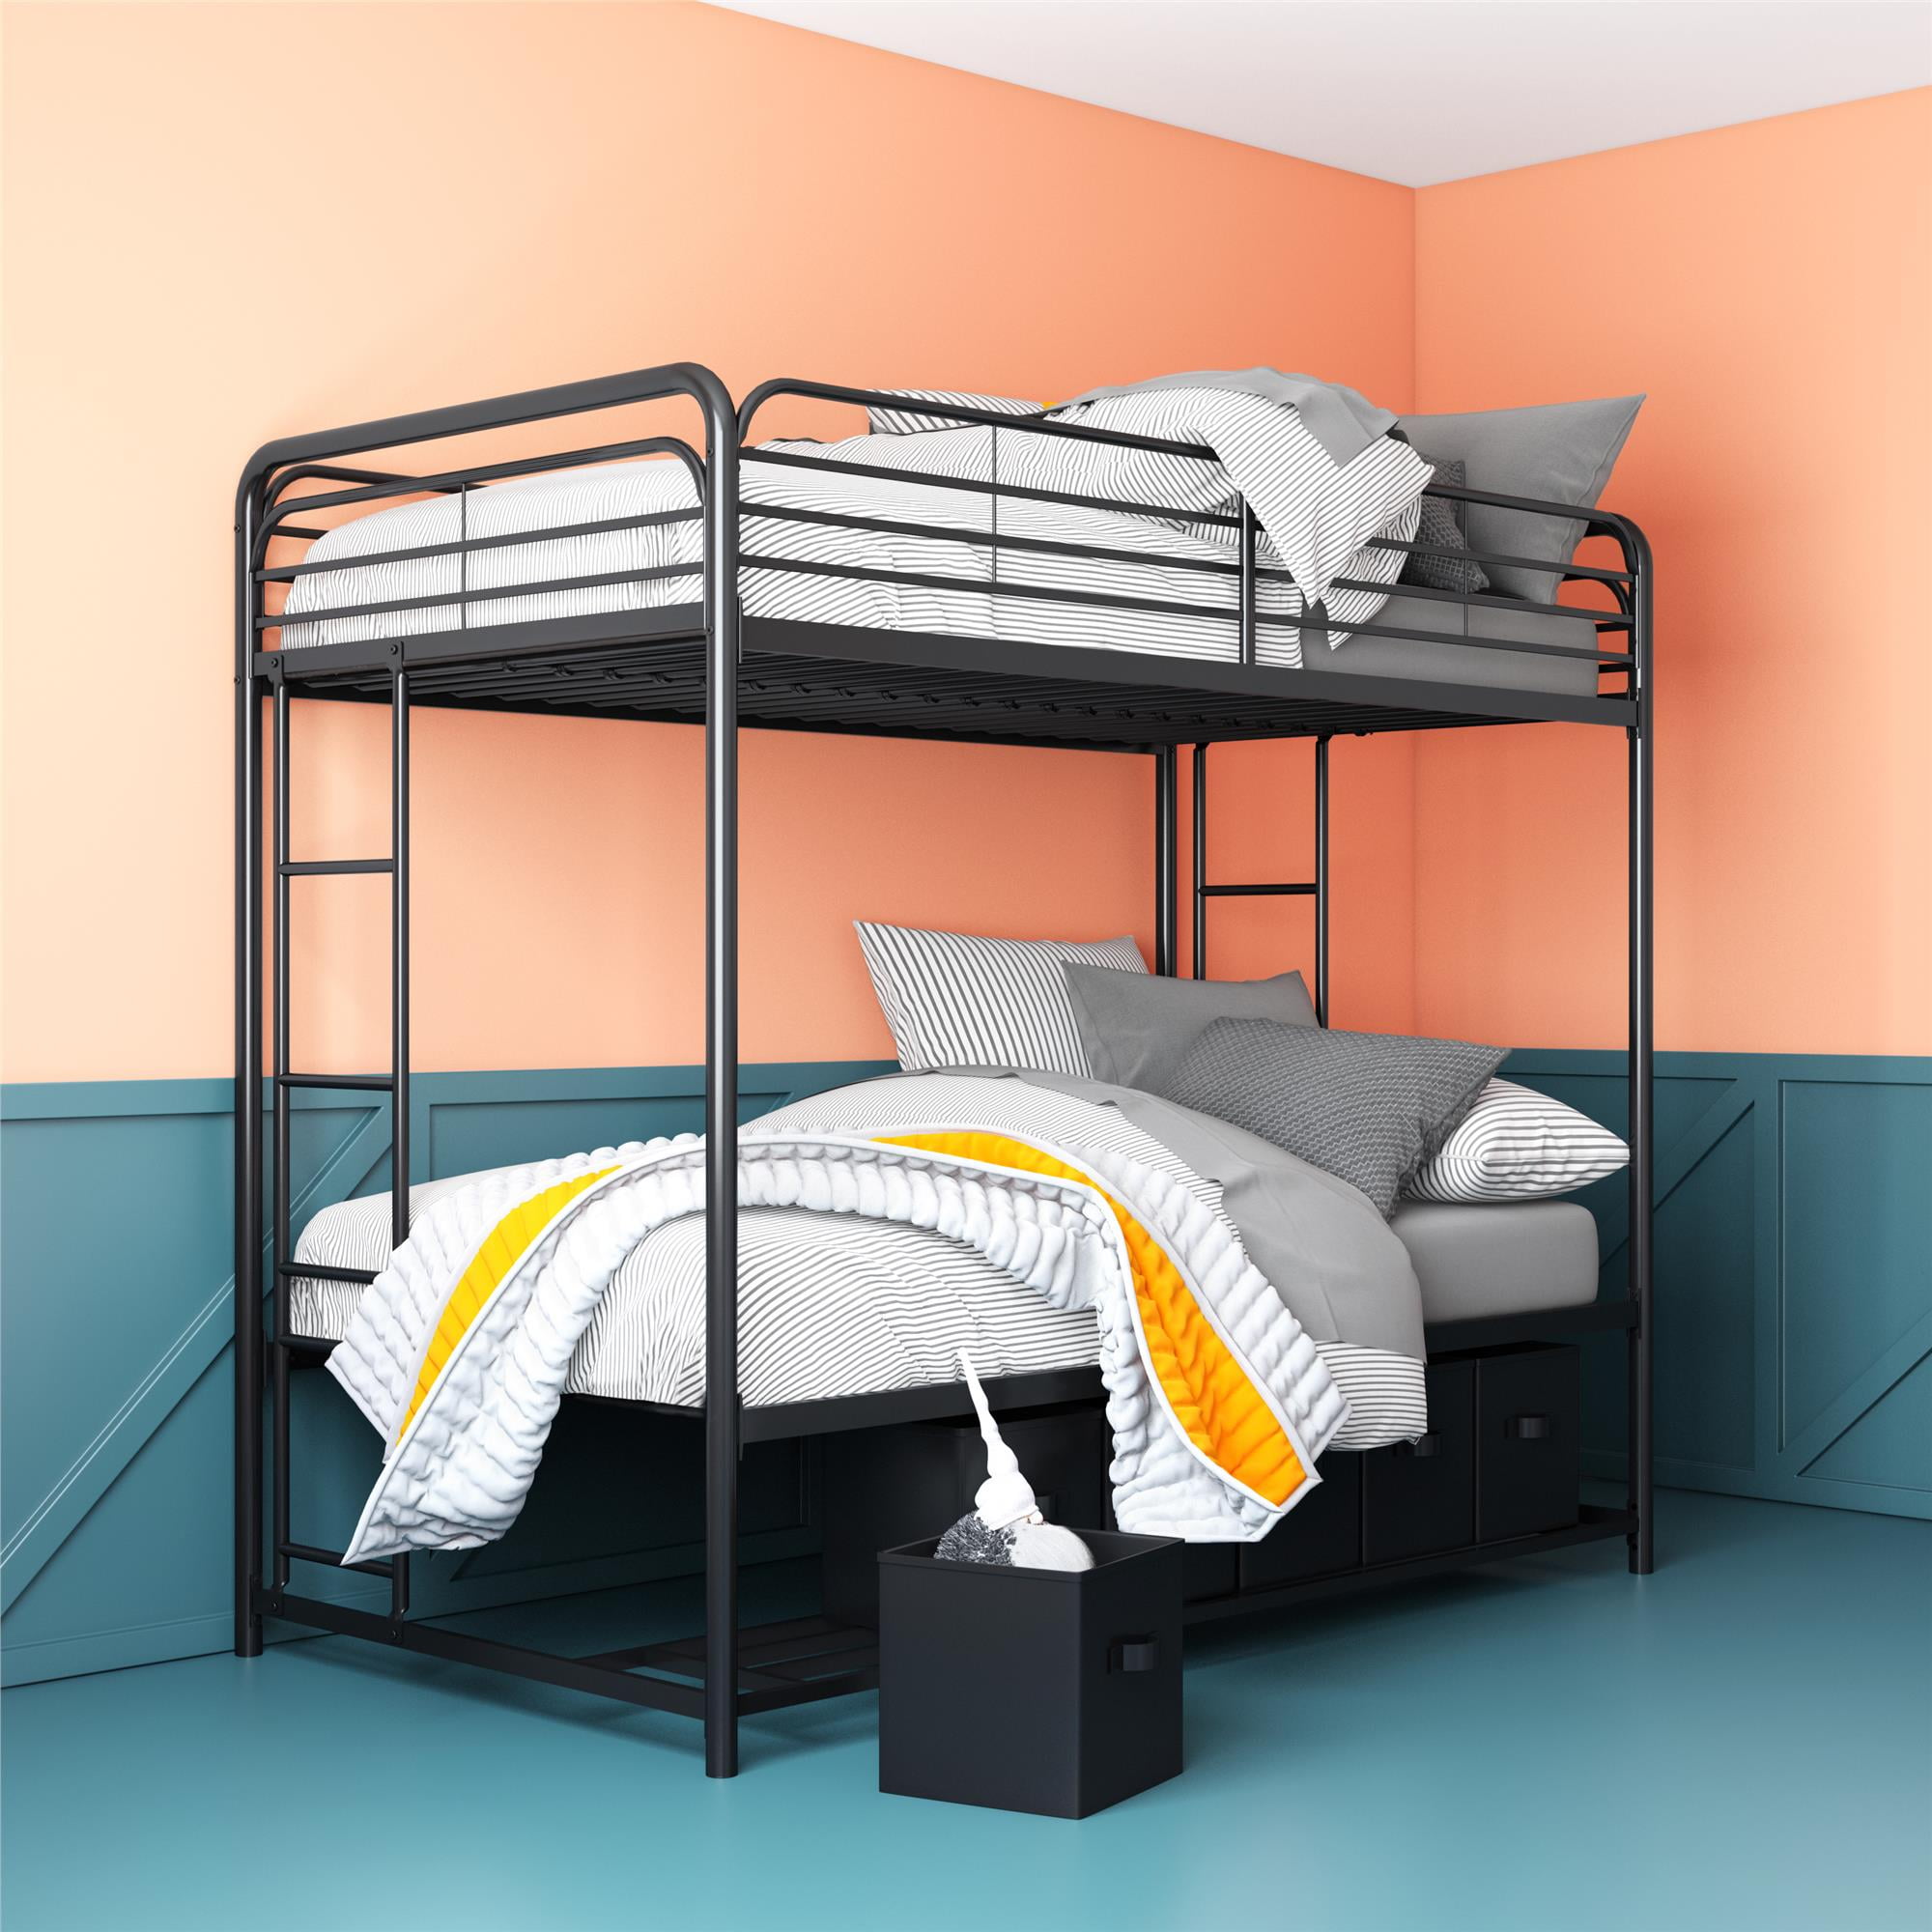 Mainstays Twin Bunk Bed With, Mainstays Bunk Bed Manual